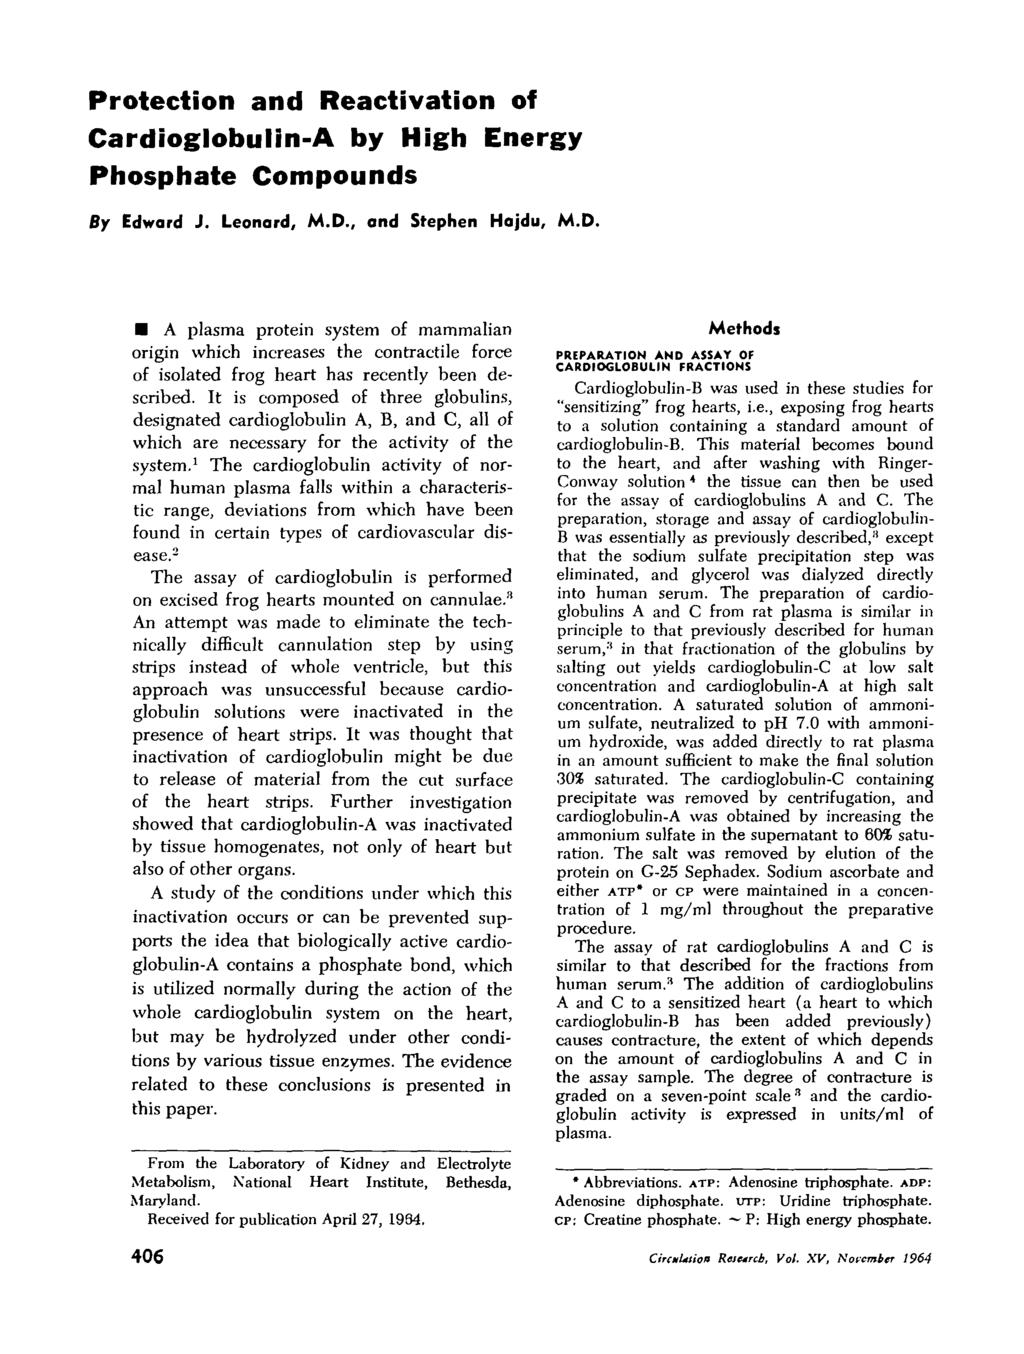 Protection and Reactivation of Cardioglobulin-A by High Energy Phosphate Compounds By Edward J. Leonard, M.D.